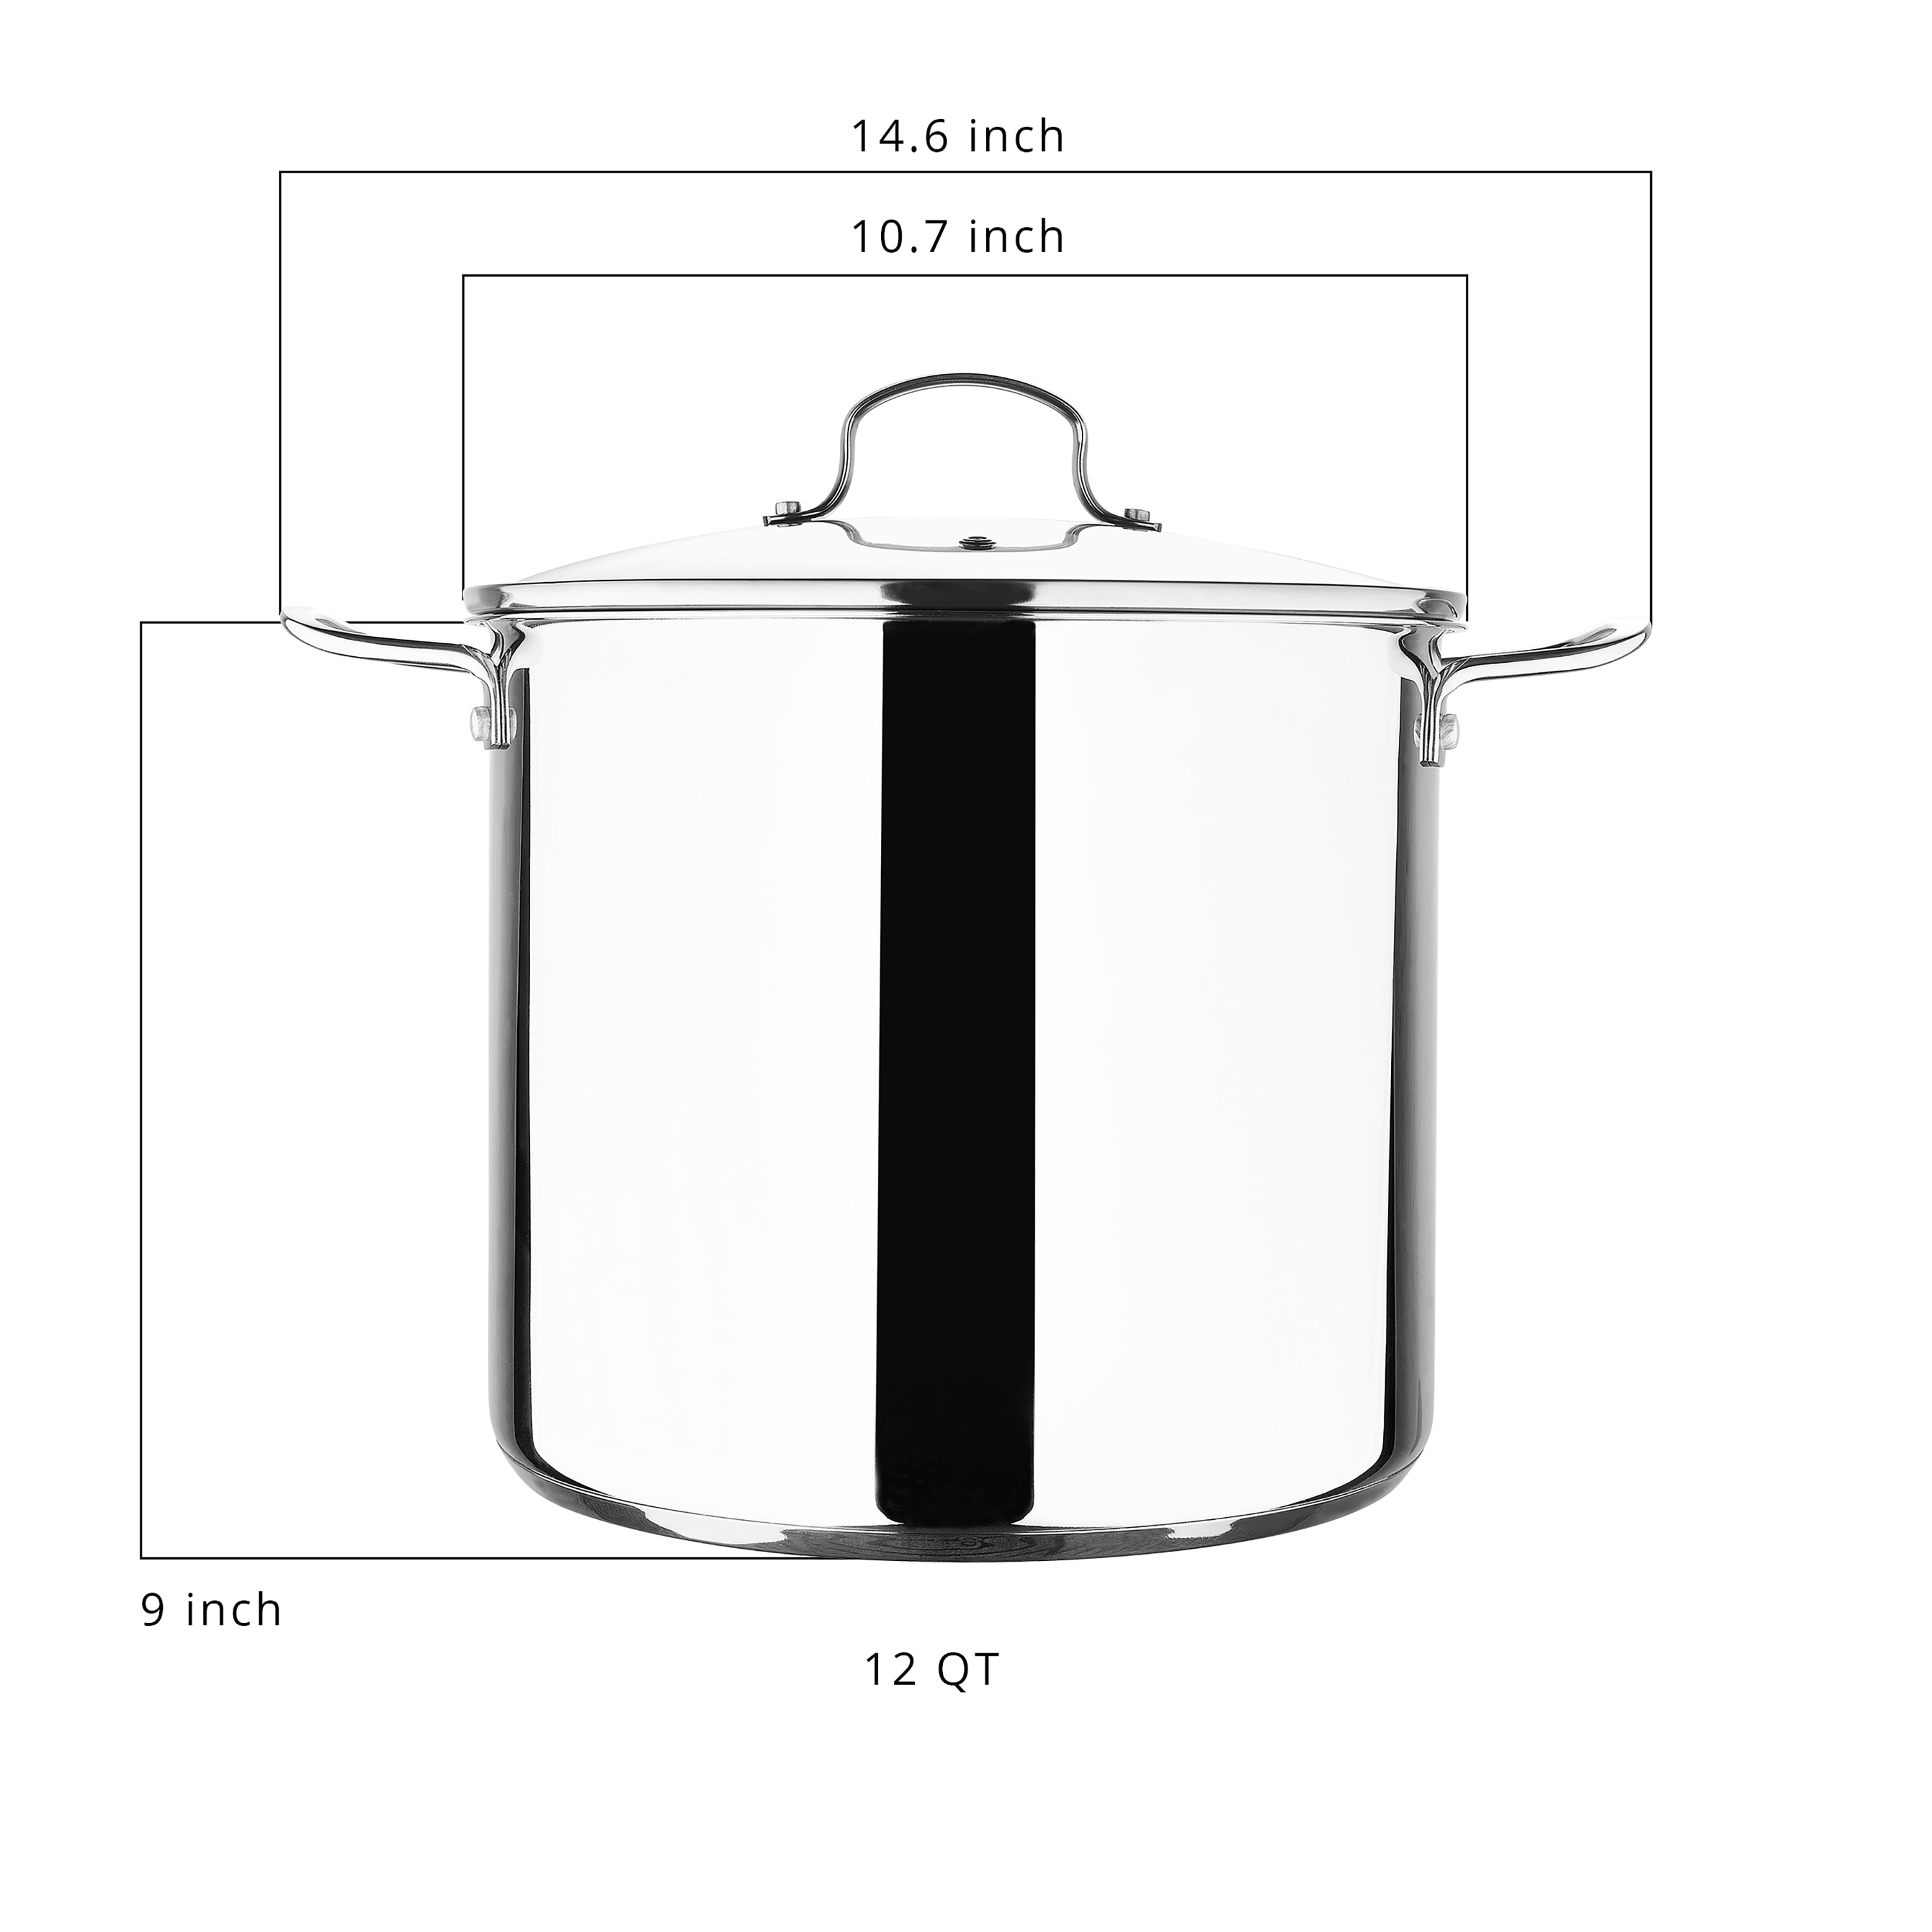 Bergner 16 Quart Stainless Steel Stock Pot with Lid